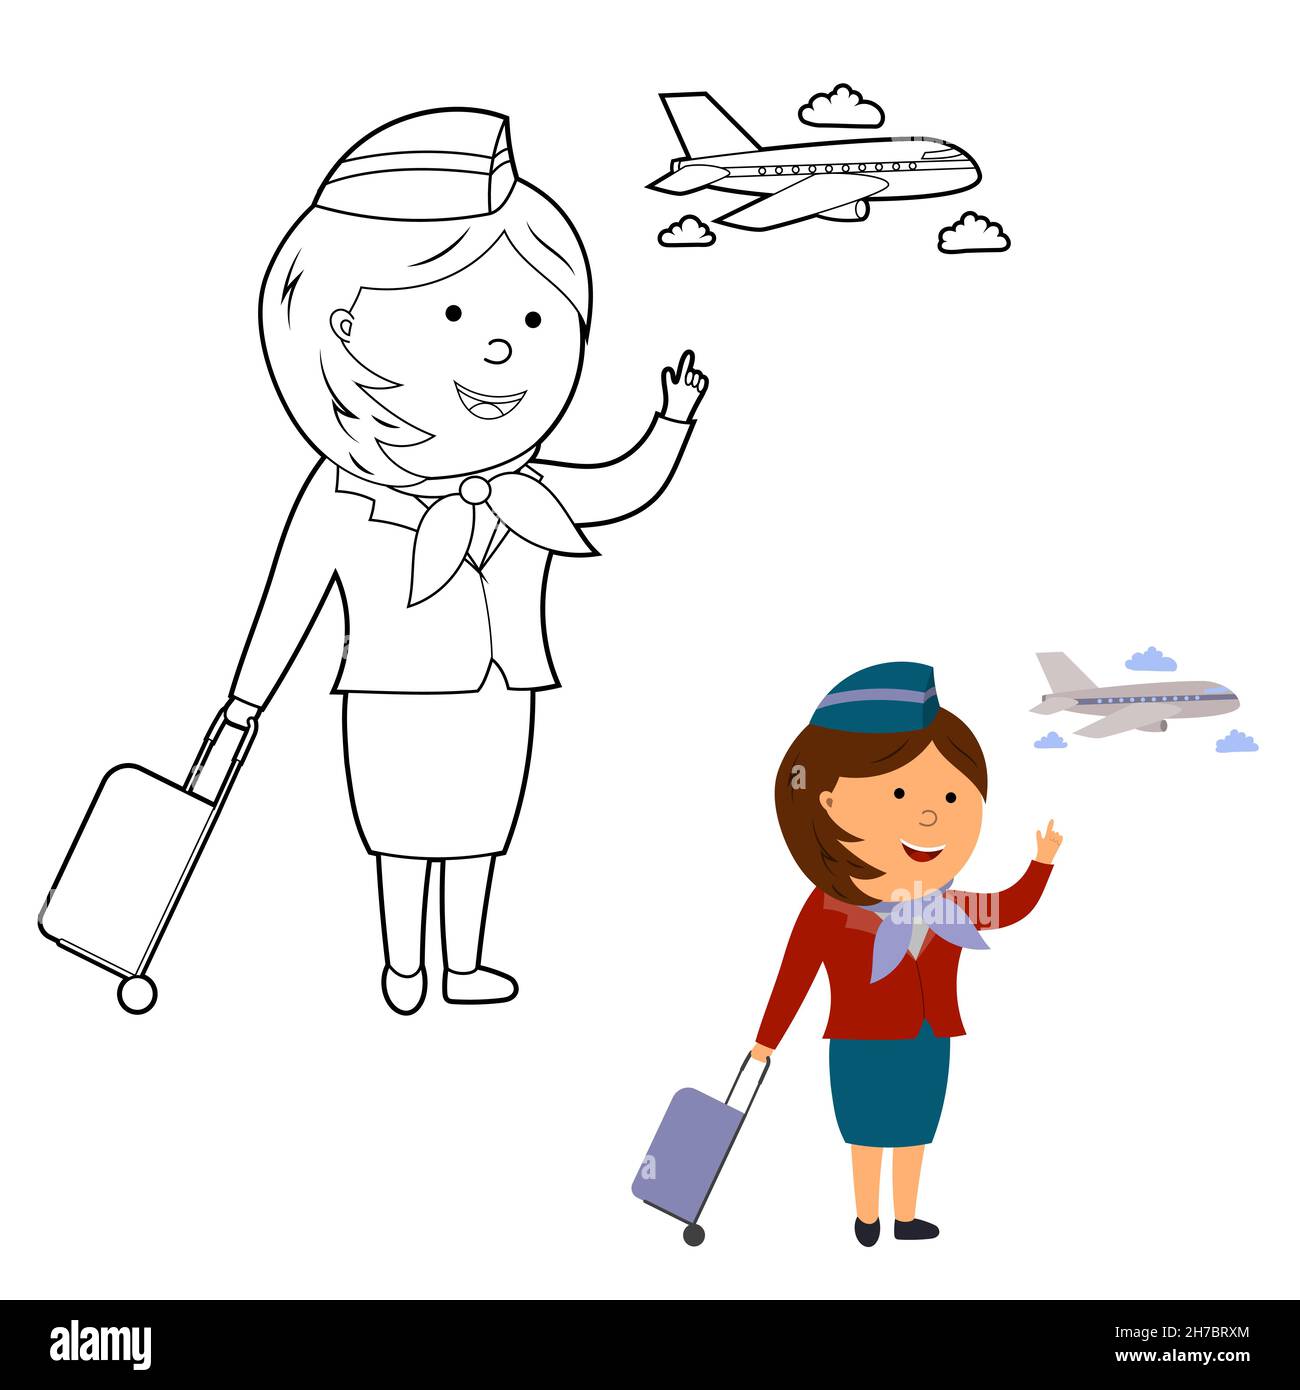 coloring book. color by pattern, cartoon illustration of a flight attendant and an airplane, vector isolated on a white background Stock Vector